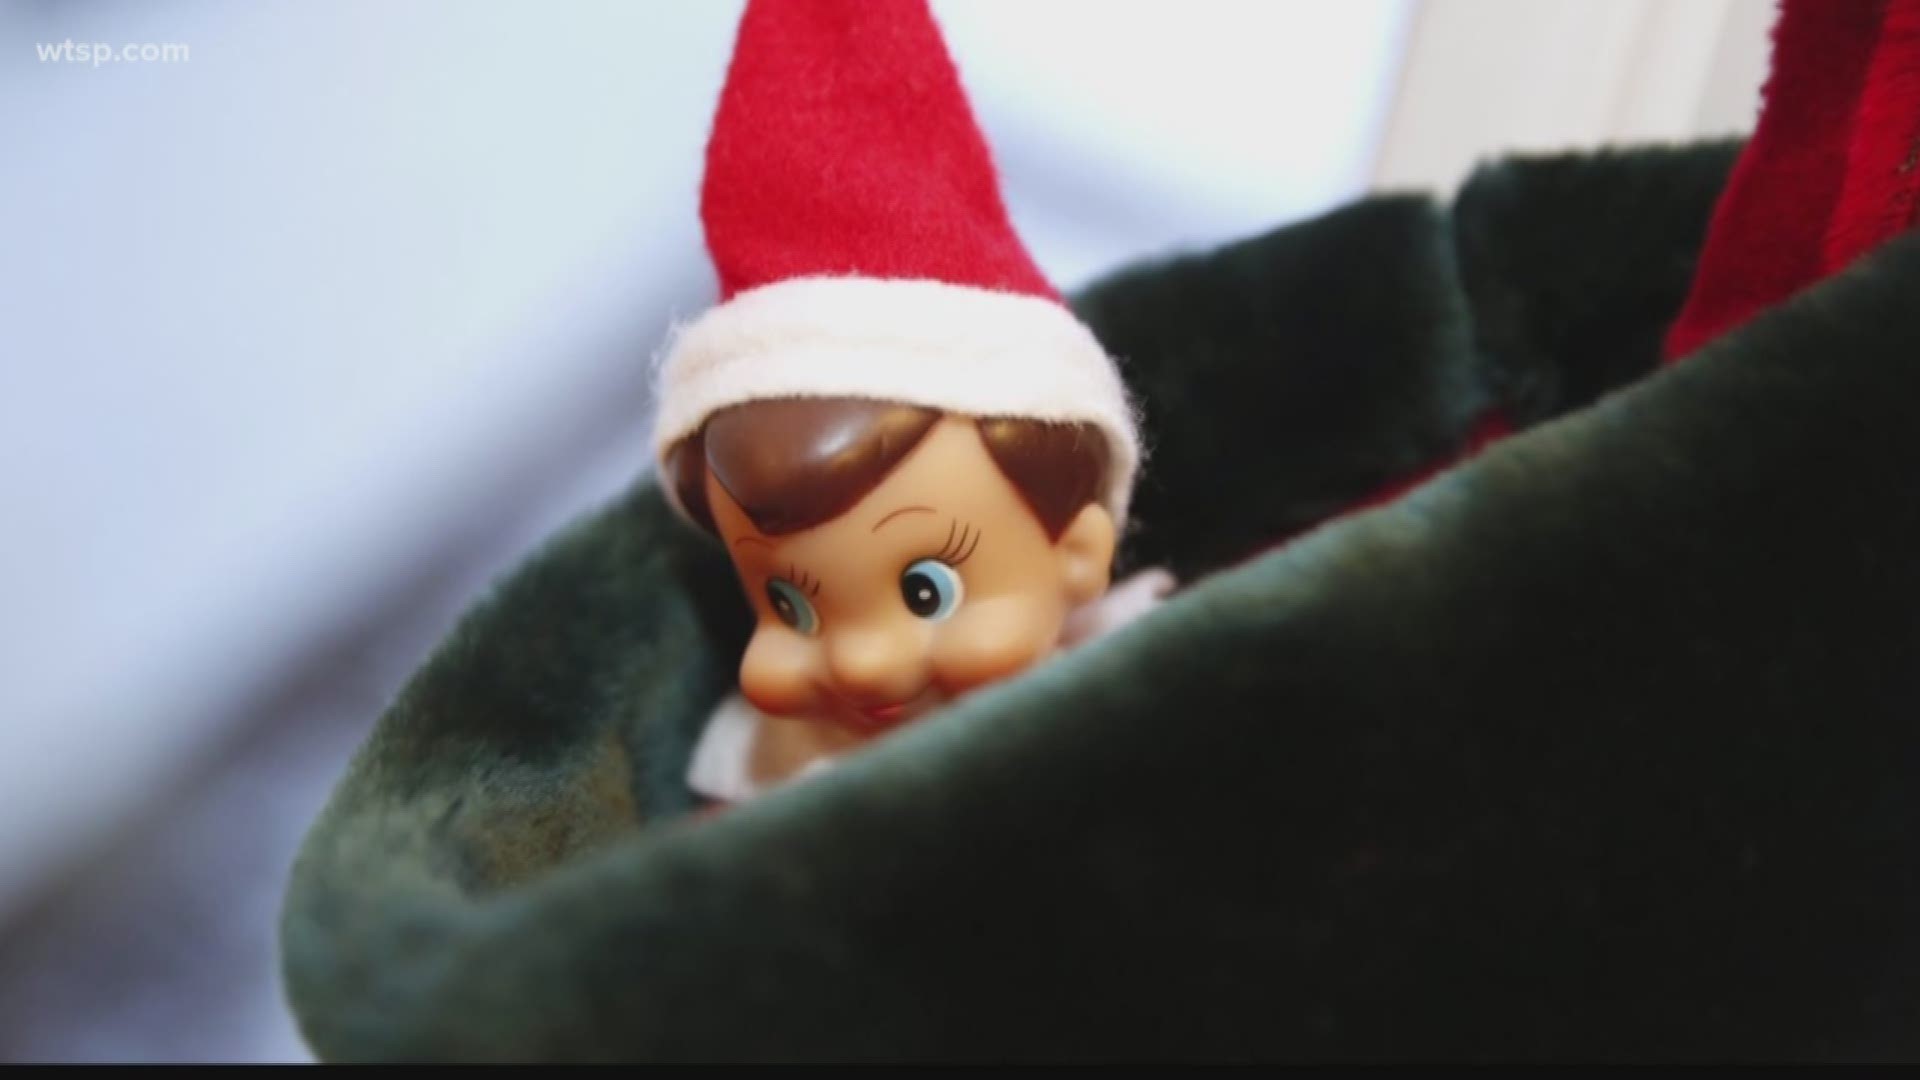 Every year, the mischievous little elf watches over families during Christmas time and reports back to Santa in the North Pole.